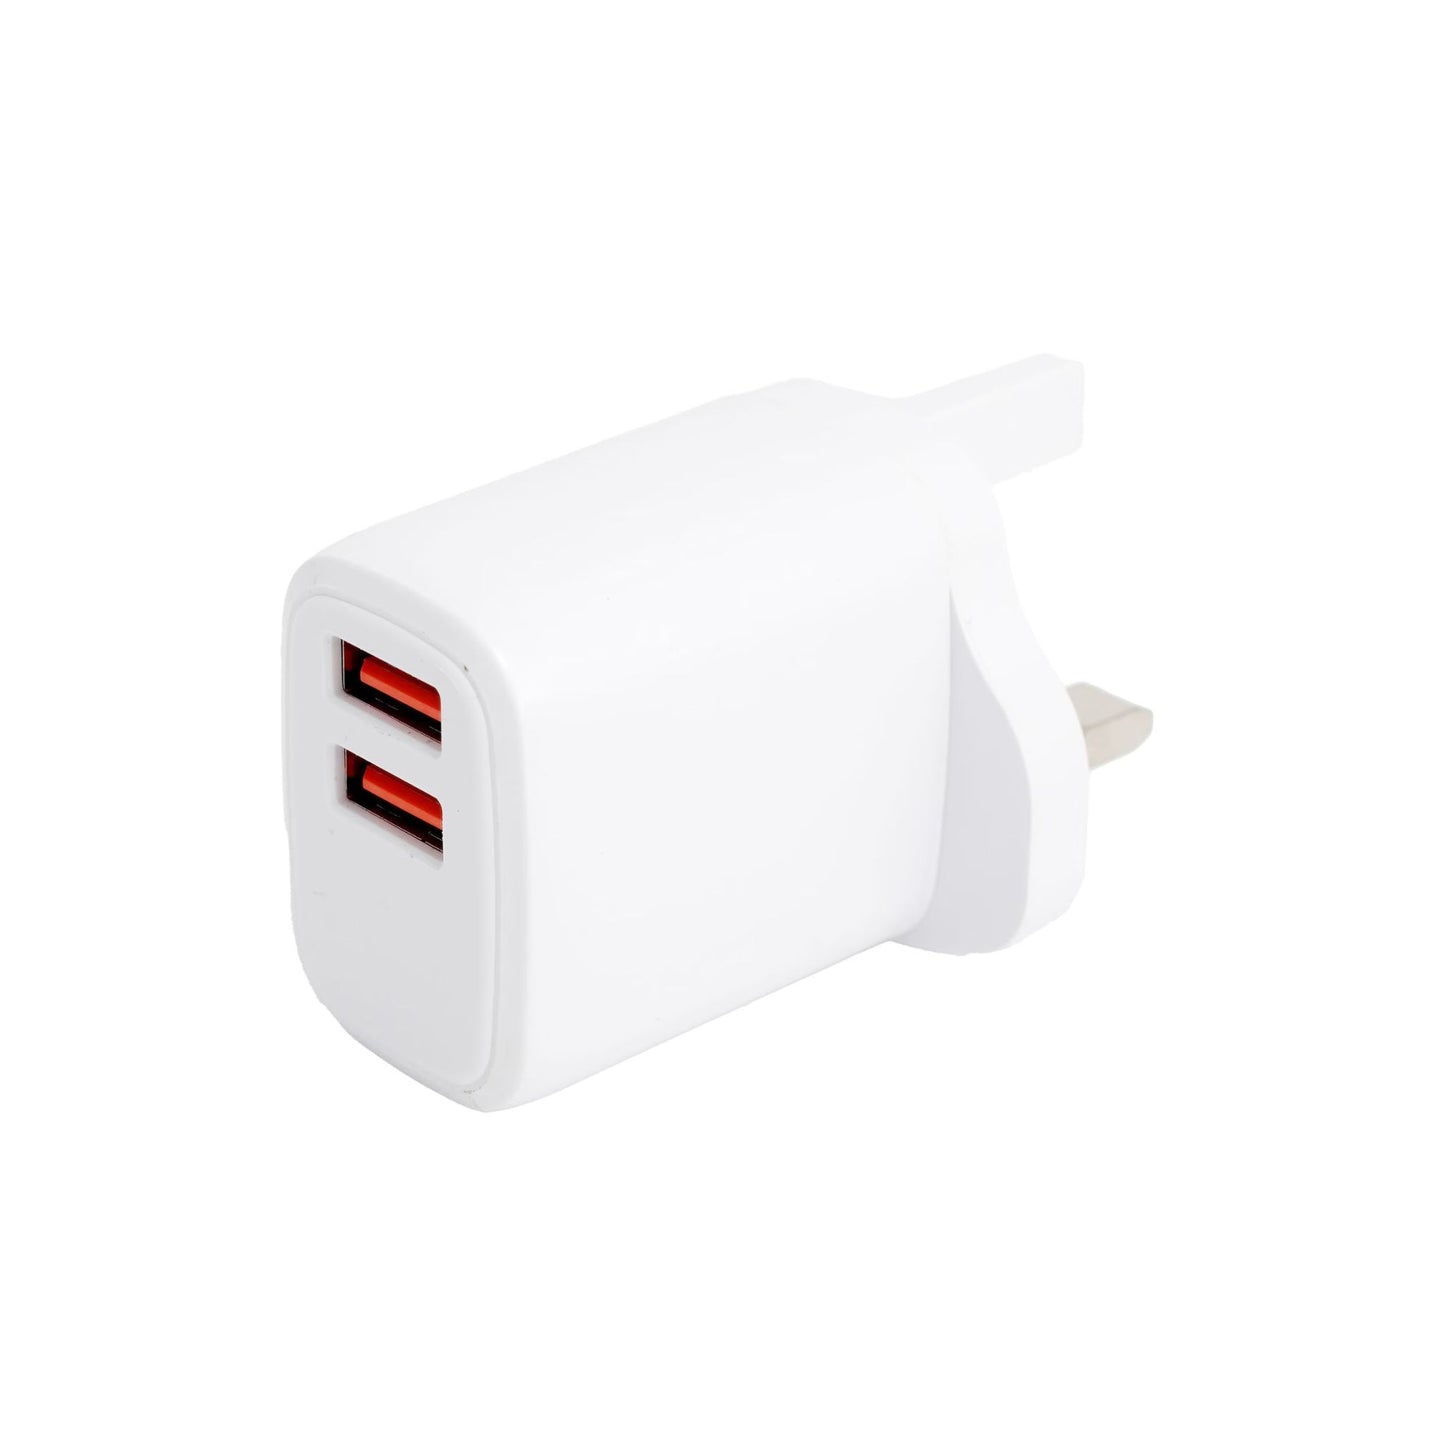 Recrsi Fast Charger for Smart Phones and Tablet PCS Other Mobile Devices with 2 USB_White